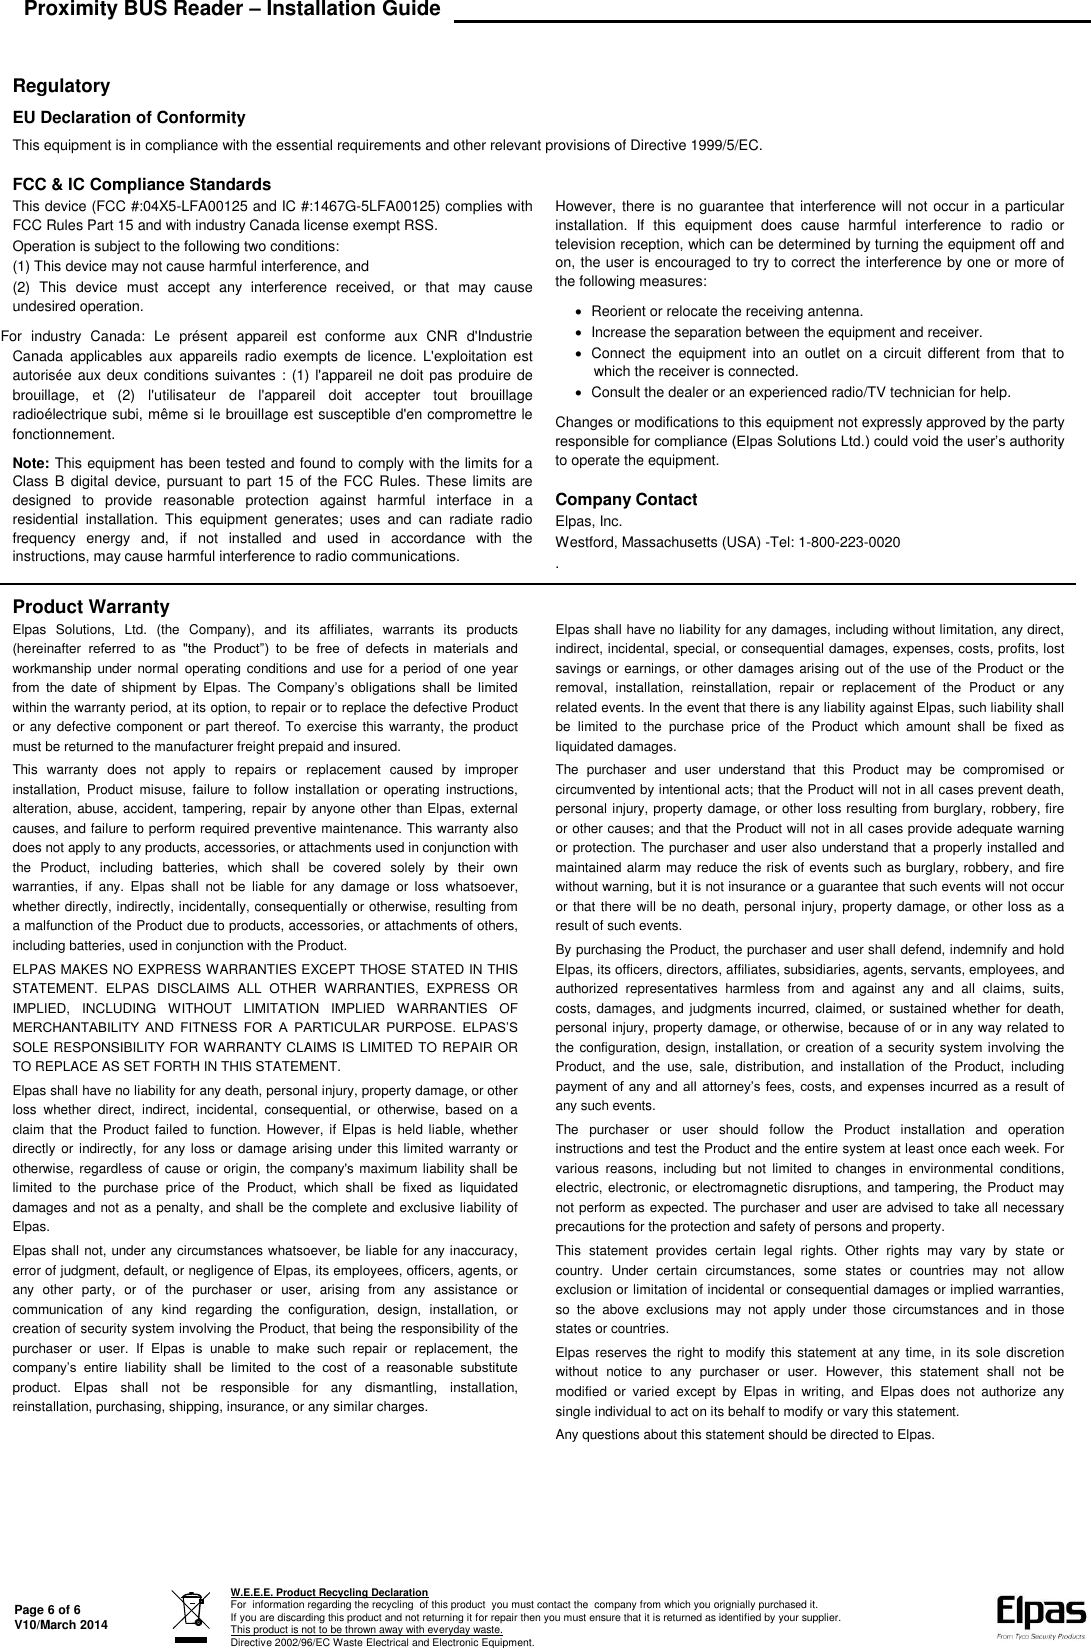 Proximity BUS Reader – Installation Guide   Page 6 of 6 V10/March 2014  W.E.E.E. Product Recycling Declaration For  information regarding the recycling  of this product  you must contact the  company from which you orignially purchased it. If you are discarding this product and not returning it for repair then you must ensure that it is returned as identified by your supplier.  This product is not to be thrown away with everyday waste. Directive 2002/96/EC Waste Electrical and Electronic Equipment.    Regulatory EU Declaration of Conformity This equipment is in compliance with the essential requirements and other relevant provisions of Directive 1999/5/EC. FCC &amp; IC Compliance StandardsThis device (FCC #:04X5-LFA00125 and IC #:1467G-5LFA00125) complies with FCC Rules Part 15 and with industry Canada license exempt RSS. Operation is subject to the following two conditions: (1) This device may not cause harmful interference, and (2)  This  device  must  accept  any  interference  received,  or  that  may  cause undesired operation. For  industry  Canada:  Le  présent  appareil  est  conforme  aux  CNR  d&apos;Industrie Canada  applicables  aux  appareils  radio  exempts  de  licence.  L&apos;exploitation  est autorisée aux deux conditions suivantes : (1) l&apos;appareil ne doit pas produire de brouillage,  et  (2)  l&apos;utilisateur  de  l&apos;appareil  doit  accepter  tout  brouillage radioélectrique subi, même si le brouillage est susceptible d&apos;en compromettre le fonctionnement. Note: This equipment has been tested and found to comply with the limits for a Class B  digital  device, pursuant to part 15 of the FCC Rules.  These limits are designed  to  provide  reasonable  protection  against  harmful  interface  in  a residential  installation.  This  equipment  generates;  uses  and  can  radiate  radio frequency  energy  and,  if  not  installed  and  used  in  accordance  with  the instructions, may cause harmful interference to radio communications. However, there is  no guarantee that interference will not occur in a particular installation.  If  this  equipment  does  cause  harmful  interference  to  radio  or television reception, which can be determined by turning the equipment off and on, the user is encouraged to try to correct the interference by one or more of the following measures:    Reorient or relocate the receiving antenna.   Increase the separation between the equipment and receiver.   Connect  the  equipment  into  an  outlet  on  a  circuit  different  from  that  to which the receiver is connected.   Consult the dealer or an experienced radio/TV technician for help.  Changes or modifications to this equipment not expressly approved by the party responsible for compliance (Elpas Solutions Ltd.) could void the user’s authority to operate the equipment. Company Contact Elpas, Inc. Westford, Massachusetts (USA) -Tel: 1-800-223-0020 . Product Warranty Elpas  Solutions,  Ltd.  (the  Company),  and  its  affiliates,  warrants  its  products (hereinafter  referred  to  as  &quot;the  Product”)  to  be  free  of  defects  in  materials  and workmanship under  normal  operating  conditions and  use for  a  period  of one year from  the  date  of  shipment  by  Elpas.  The  Company’s  obligations  shall  be  limited within the warranty period, at its option, to repair or to replace the defective Product or any defective  component or part thereof. To  exercise this warranty, the product must be returned to the manufacturer freight prepaid and insured. This  warranty  does  not  apply  to  repairs  or  replacement  caused  by  improper installation,  Product  misuse,  failure  to  follow  installation  or  operating  instructions, alteration, abuse, accident, tampering, repair by anyone other than Elpas, external causes, and failure to perform required preventive maintenance. This warranty also does not apply to any products, accessories, or attachments used in conjunction with the  Product,  including  batteries,  which  shall  be  covered  solely  by  their  own warranties,  if  any.  Elpas  shall  not  be  liable  for  any  damage  or  loss  whatsoever, whether directly, indirectly, incidentally, consequentially or otherwise, resulting from a malfunction of the Product due to products, accessories, or attachments of others, including batteries, used in conjunction with the Product. ELPAS MAKES NO EXPRESS WARRANTIES EXCEPT THOSE STATED IN THIS STATEMENT.  ELPAS  DISCLAIMS  ALL  OTHER  WARRANTIES,  EXPRESS  OR IMPLIED,  INCLUDING  WITHOUT  LIMITATION  IMPLIED  WARRANTIES  OF MERCHANTABILITY  AND  FITNESS  FOR  A  PARTICULAR  PURPOSE.  ELPAS’S SOLE RESPONSIBILITY FOR WARRANTY CLAIMS IS LIMITED TO REPAIR OR TO REPLACE AS SET FORTH IN THIS STATEMENT. Elpas shall have no liability for any death, personal injury, property damage, or other loss  whether  direct,  indirect,  incidental,  consequential,  or  otherwise,  based  on  a claim  that the  Product failed  to function. However, if Elpas is  held liable, whether directly  or  indirectly, for any loss or damage arising under this limited warranty or otherwise, regardless  of cause or  origin, the company&apos;s maximum liability shall be limited  to  the  purchase  price  of  the  Product,  which  shall  be  fixed  as  liquidated damages and not as a penalty, and shall be the complete and exclusive liability of Elpas. Elpas shall not, under any circumstances whatsoever, be liable for any inaccuracy, error of judgment, default, or negligence of Elpas, its employees, officers, agents, or any  other  party,  or  of  the  purchaser  or  user,  arising  from  any  assistance  or communication  of  any  kind  regarding  the  configuration,  design,  installation,  or creation of security system involving the Product, that being the responsibility of the purchaser  or  user.  If  Elpas  is  unable  to  make  such  repair  or  replacement,  the company’s  entire  liability  shall  be  limited  to  the  cost  of  a  reasonable  substitute product.  Elpas  shall  not  be  responsible  for  any  dismantling,  installation, reinstallation, purchasing, shipping, insurance, or any similar charges.  Elpas shall have no liability for any damages, including without limitation, any direct, indirect, incidental, special, or consequential damages, expenses, costs, profits, lost savings or earnings, or other damages arising out of the use of the Product or the removal,  installation,  reinstallation,  repair  or  replacement  of  the  Product  or  any related events. In the event that there is any liability against Elpas, such liability shall be  limited  to  the  purchase  price  of  the  Product  which  amount  shall  be  fixed  as liquidated damages. The  purchaser  and  user  understand  that  this  Product  may  be  compromised  or circumvented by intentional acts; that the Product will not in all cases prevent death, personal injury, property damage, or other loss resulting from burglary, robbery, fire or other causes; and that the Product will not in all cases provide adequate warning or protection. The purchaser and user also understand that a properly installed and maintained alarm may reduce the risk of events such as burglary, robbery, and fire without warning, but it is not insurance or a guarantee that such events will not occur or that there will be no death, personal injury, property damage, or other loss as a result of such events. By purchasing the Product, the purchaser and user shall defend, indemnify and hold Elpas, its officers, directors, affiliates, subsidiaries, agents, servants, employees, and authorized  representatives  harmless  from  and  against  any  and  all  claims,  suits, costs, damages,  and judgments incurred, claimed,  or  sustained whether for death, personal injury, property damage, or otherwise, because of or in any way related to the configuration, design, installation, or creation of a security system involving the Product,  and  the  use,  sale,  distribution,  and  installation  of  the  Product,  including payment of any and  all attorney’s fees, costs, and expenses incurred as a result of any such events. The  purchaser  or  user  should  follow  the  Product  installation  and  operation instructions and test the Product and the entire system at least once each week. For various  reasons,  including  but  not  limited  to  changes in  environmental  conditions, electric,  electronic, or electromagnetic disruptions, and tampering, the Product may not perform as expected. The purchaser and user are advised to take all necessary precautions for the protection and safety of persons and property. This  statement  provides  certain  legal  rights.  Other  rights  may  vary  by  state  or country.  Under  certain  circumstances,  some  states  or  countries  may  not  allow exclusion or limitation of incidental or consequential damages or implied warranties, so  the  above  exclusions  may  not  apply  under  those  circumstances  and  in  those states or countries. Elpas  reserves the right to  modify this  statement at any time, in its sole discretion without  notice  to  any  purchaser  or  user.  However,  this  statement  shall  not  be modified  or  varied  except  by  Elpas  in  writing,  and  Elpas  does  not  authorize  any single individual to act on its behalf to modify or vary this statement. Any questions about this statement should be directed to Elpas.   